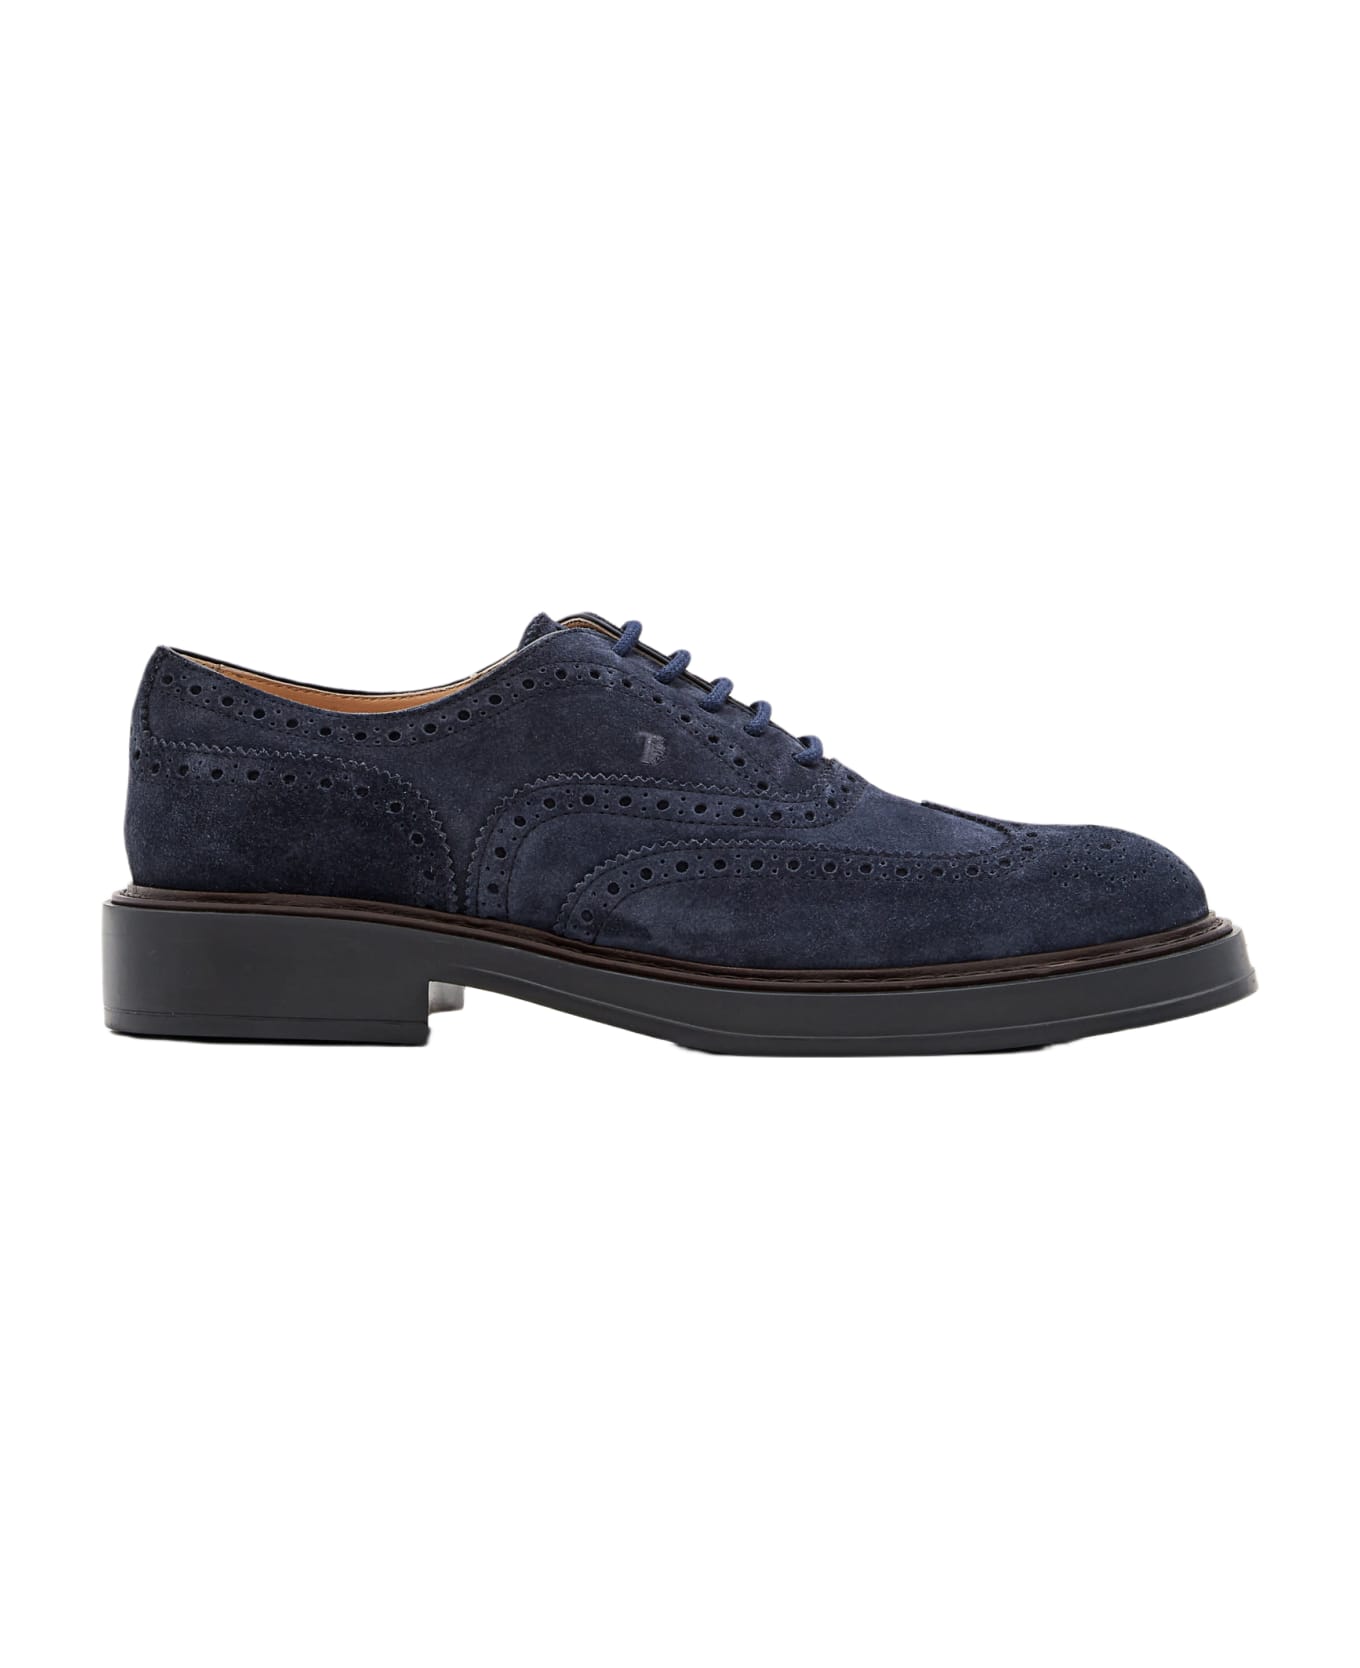 Tod's Francesina Bucature Extralight Derby Shoes - Blue ローファー＆デッキシューズ